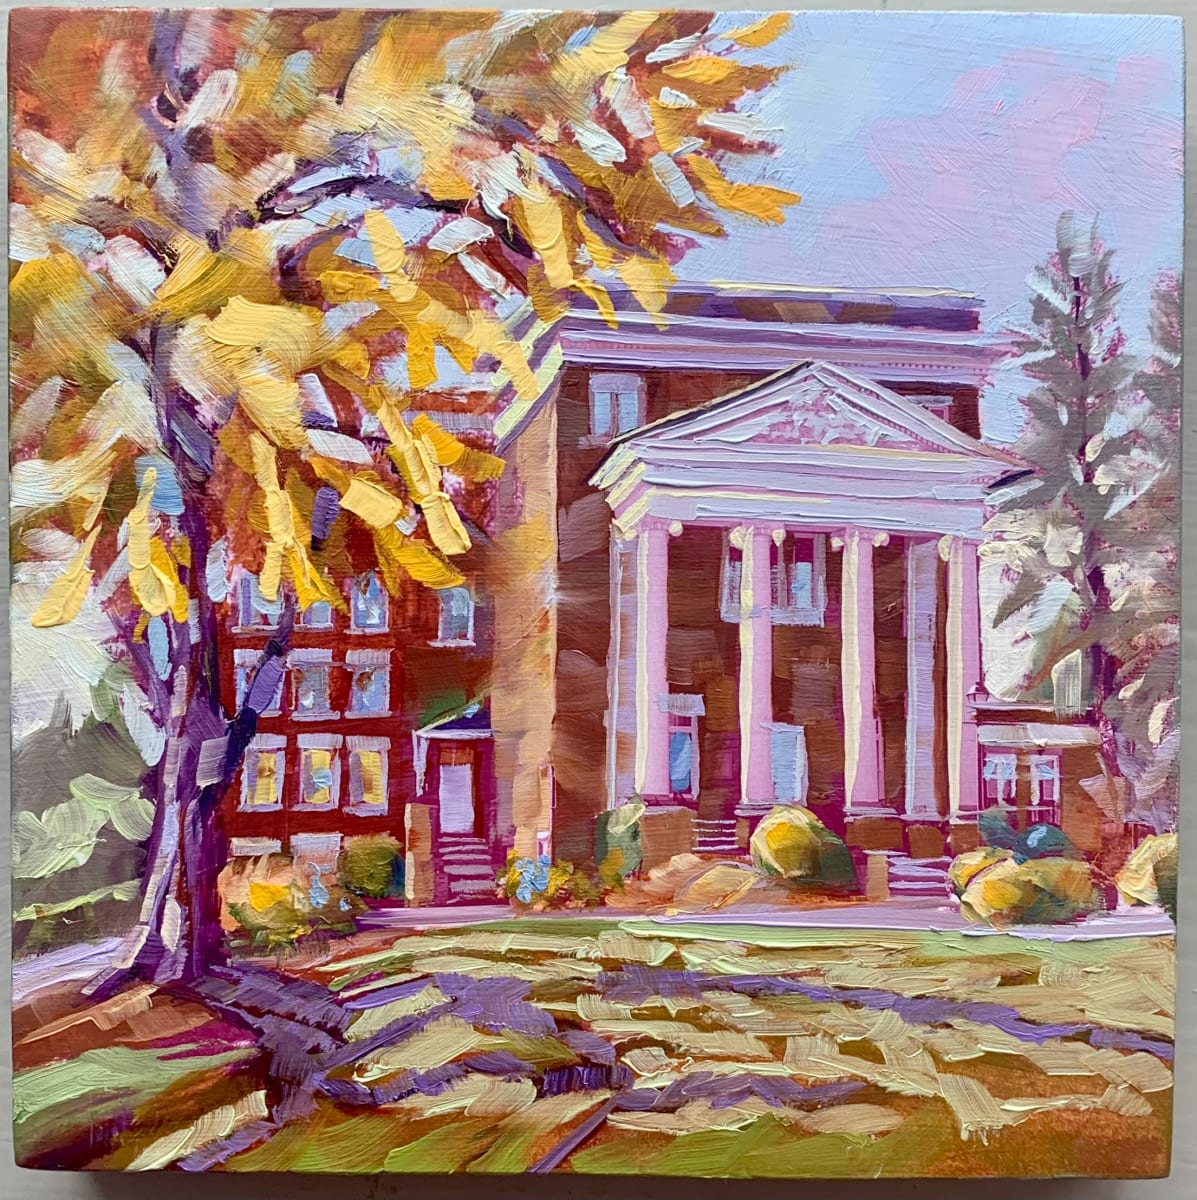 Carnegie Hall in Autumn by Pat Cross  Image: 6x6 oil painting